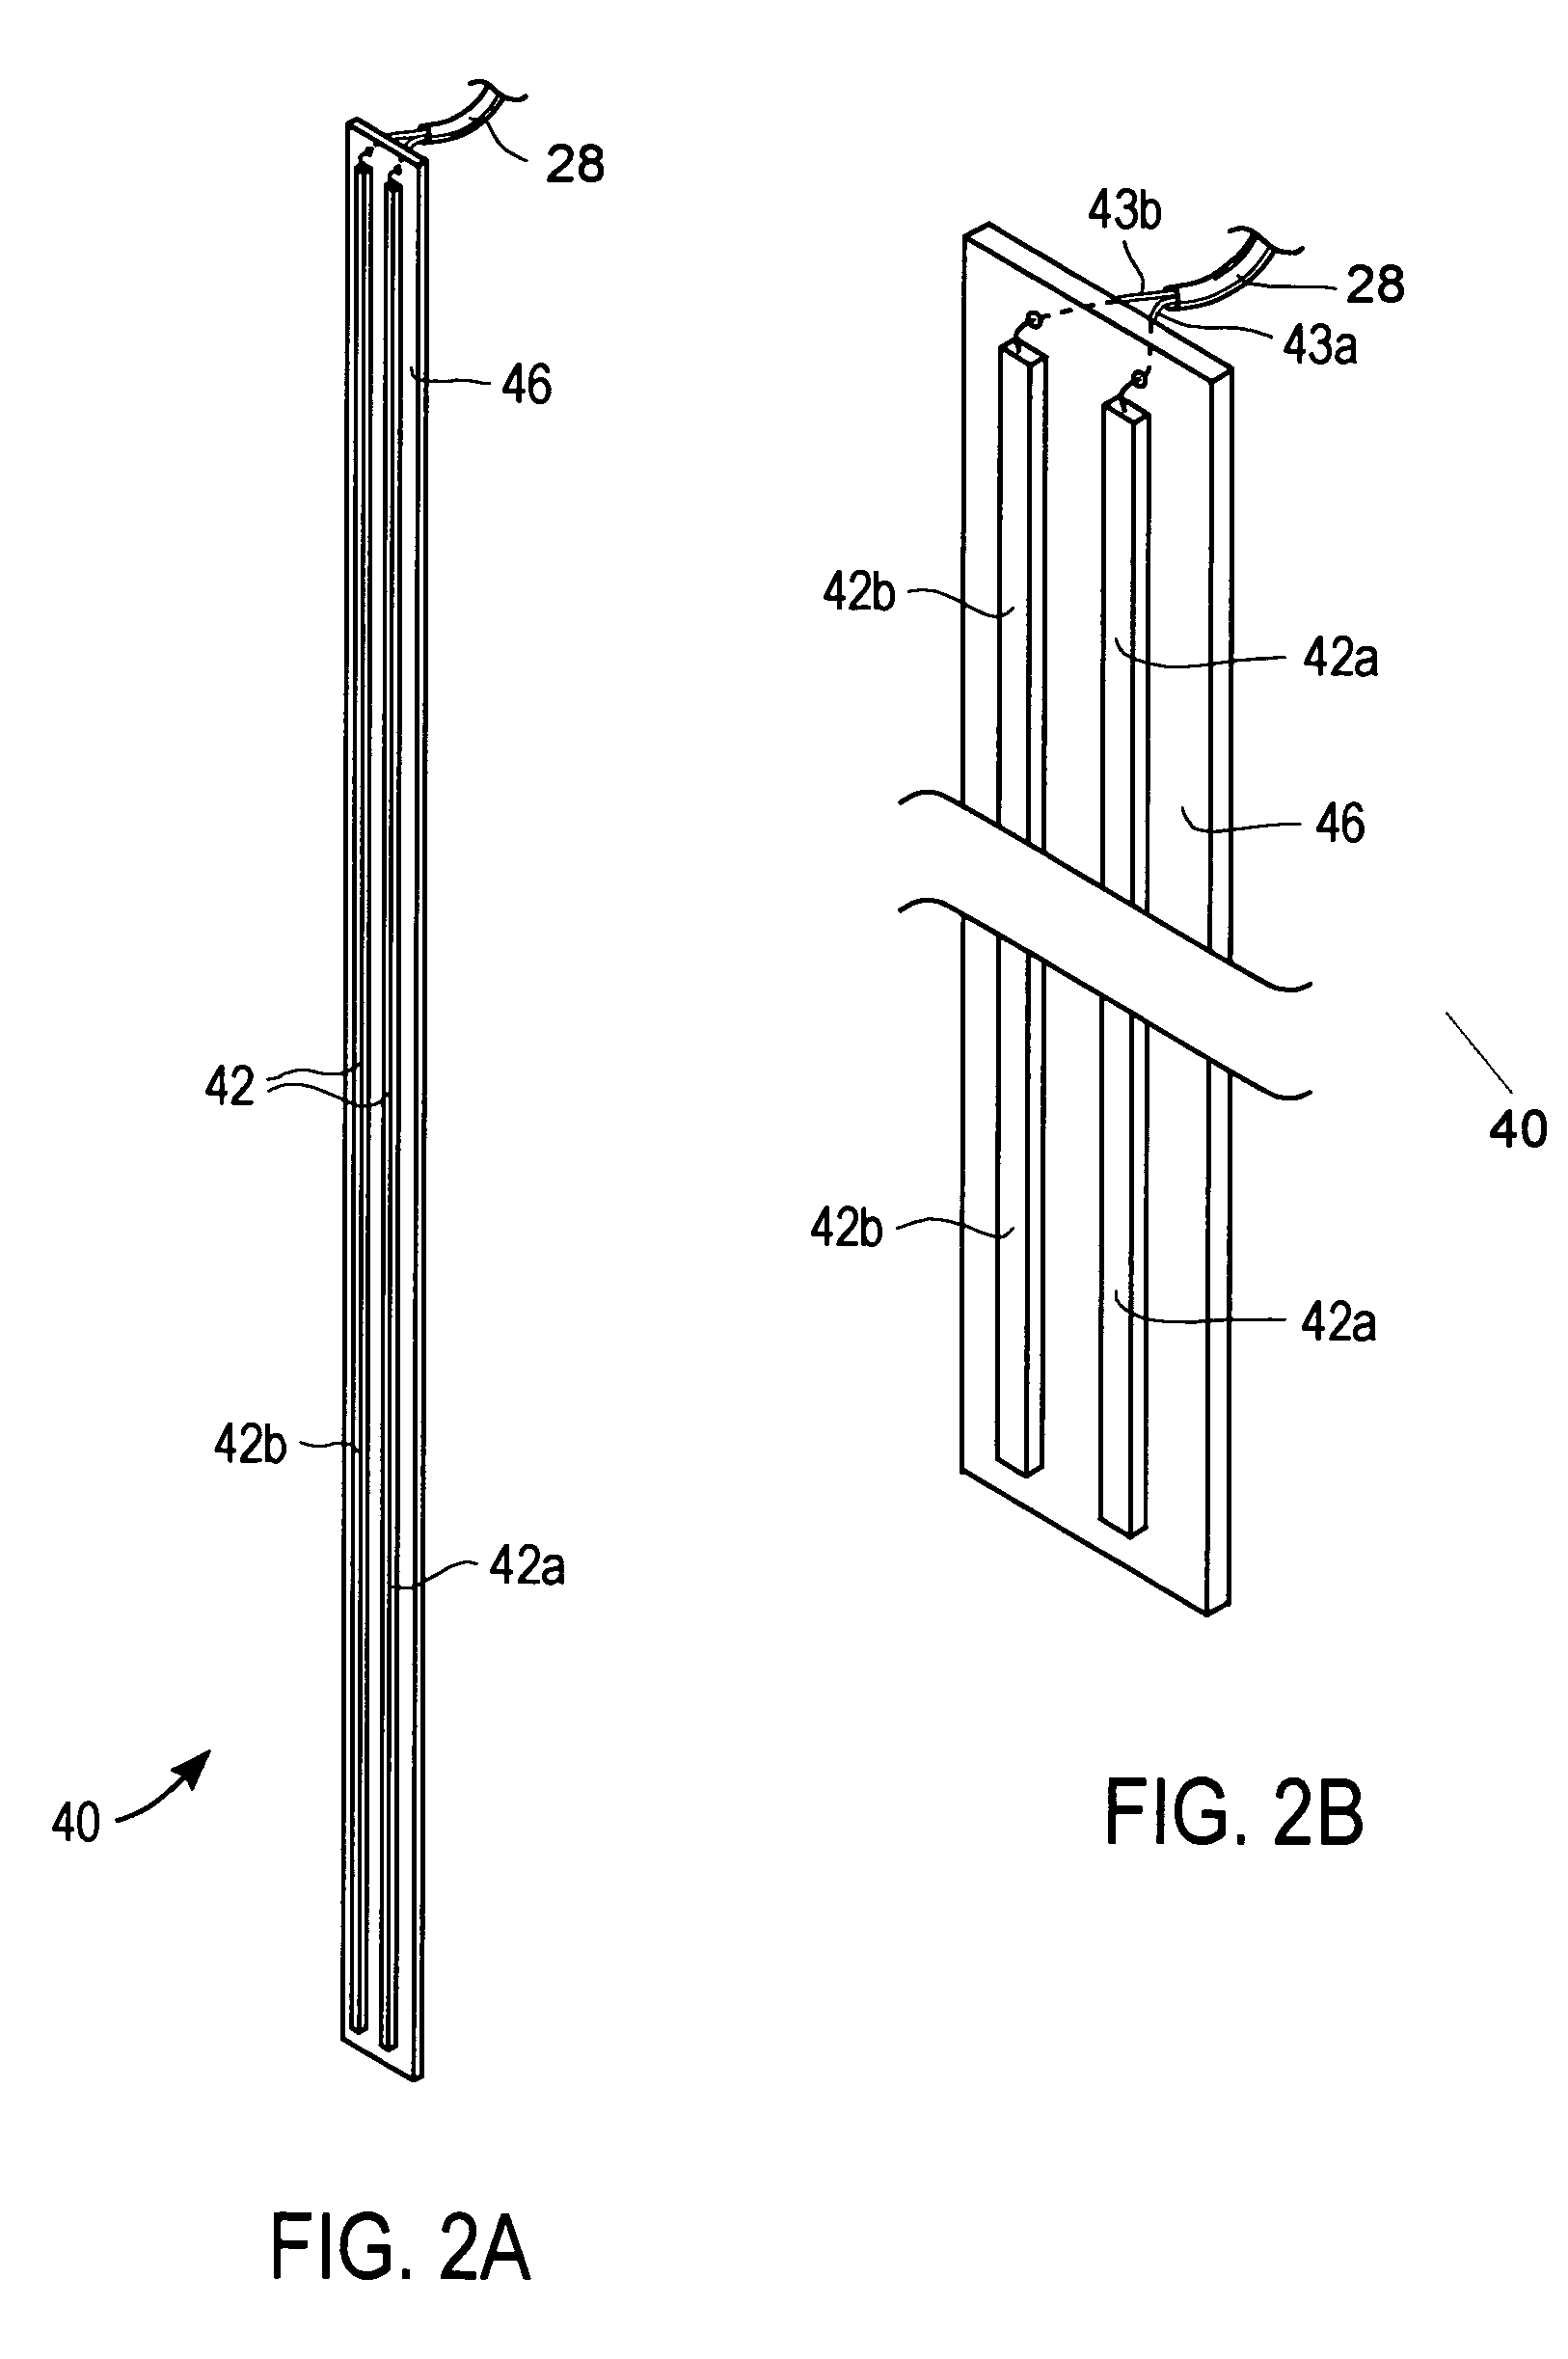 Apparatus and methods for monitoring water consumption and filter usage